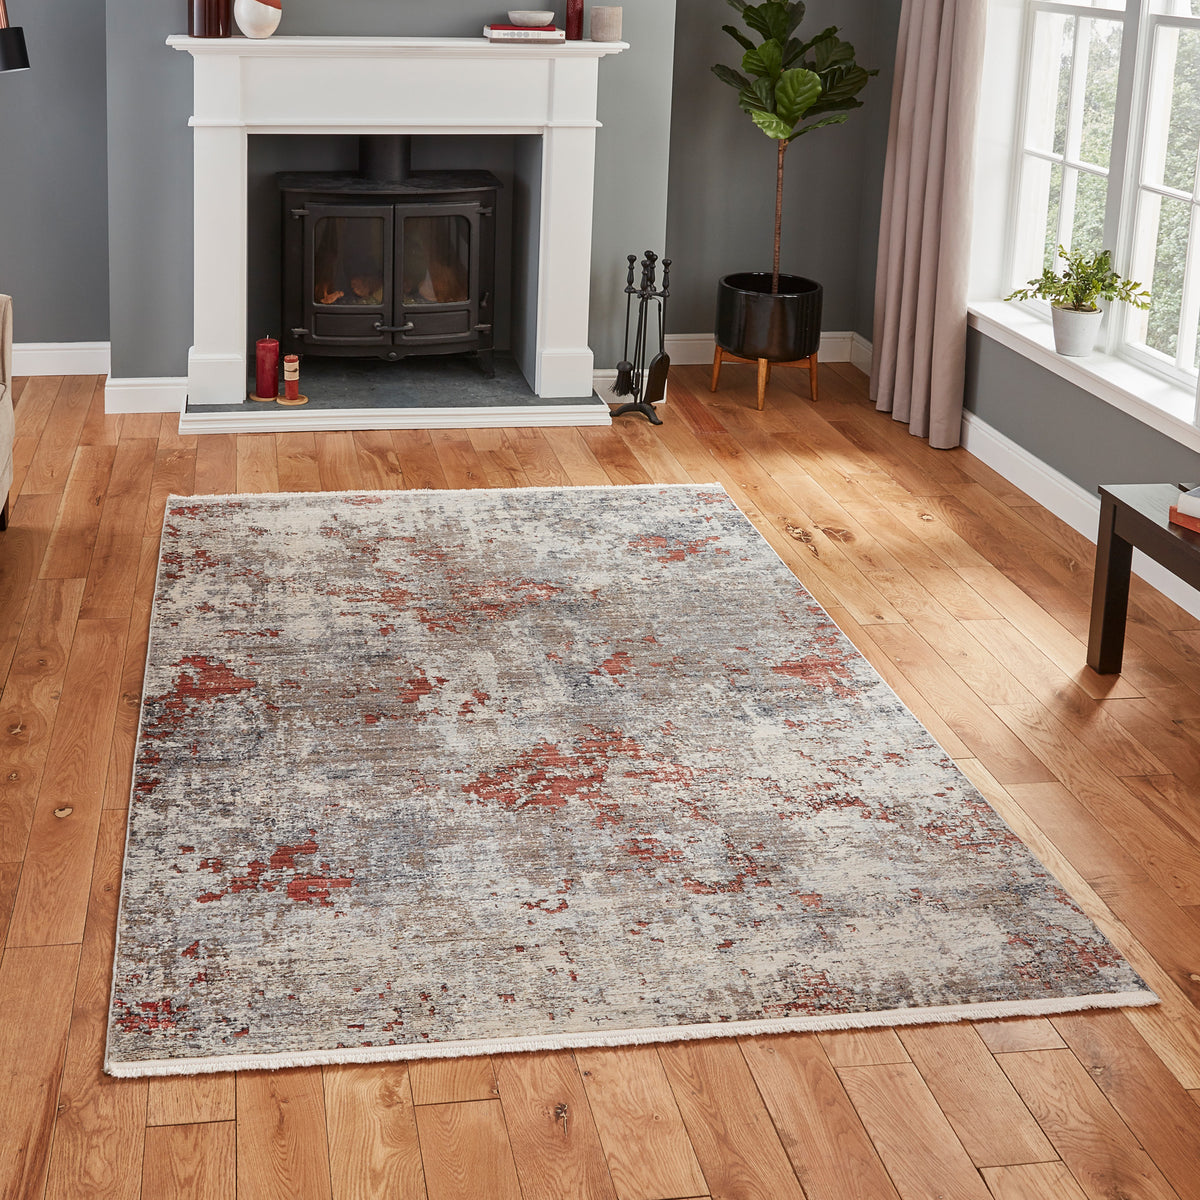 Thea Distressed Terracotta Antique Rug for living room